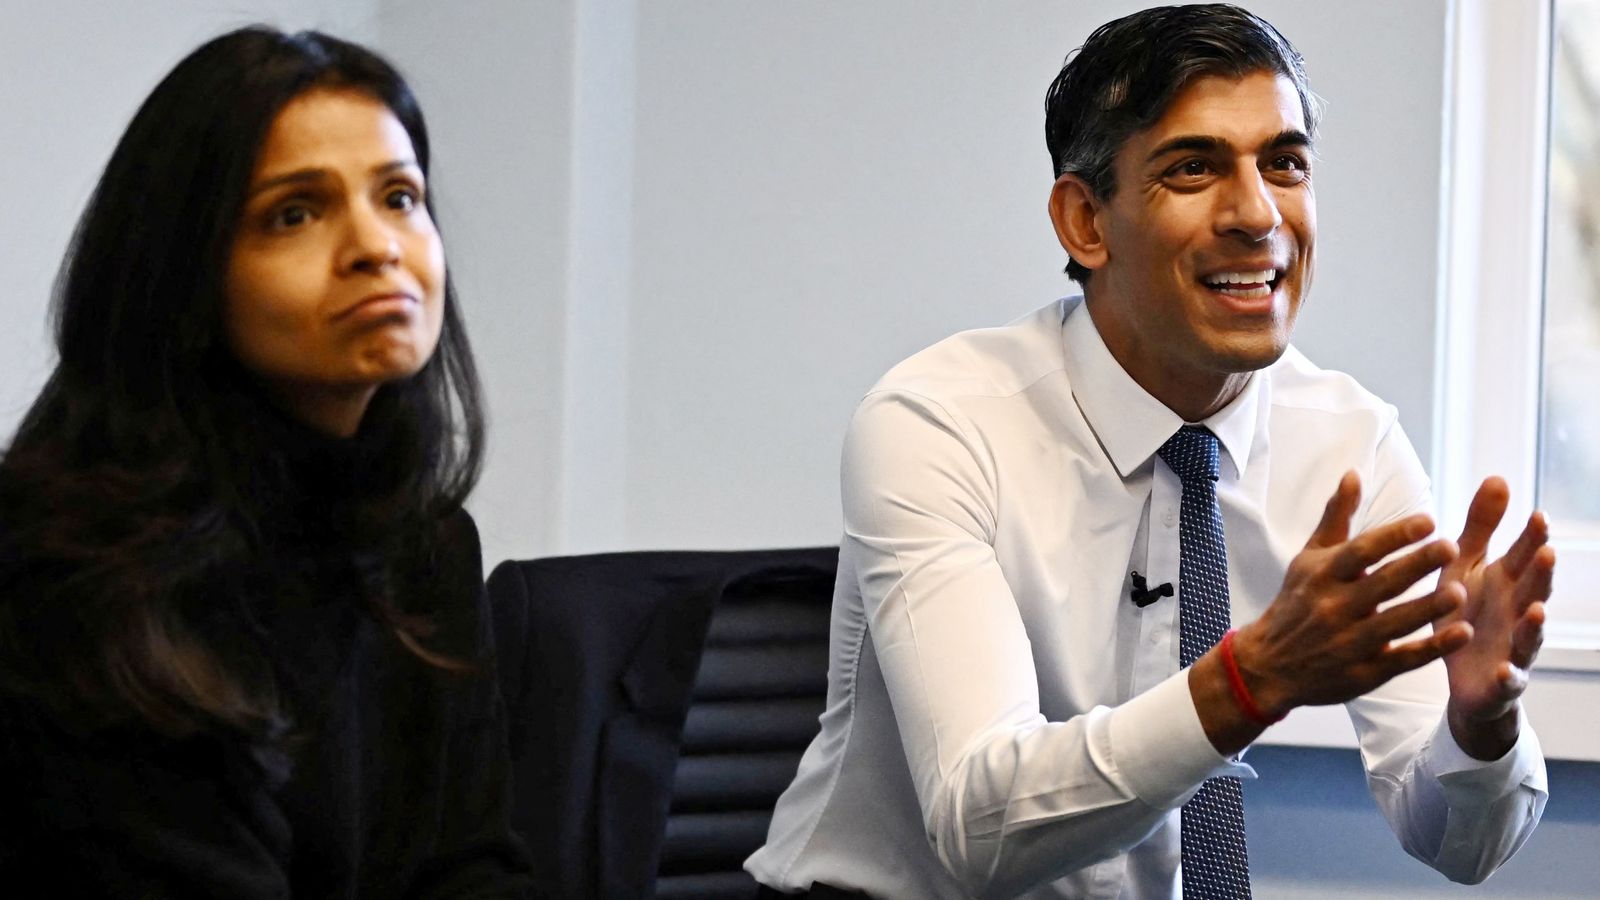 'Pattern of behaviour' emerging about interests of Rishi Sunak's wife, says Sir Keir Starmer